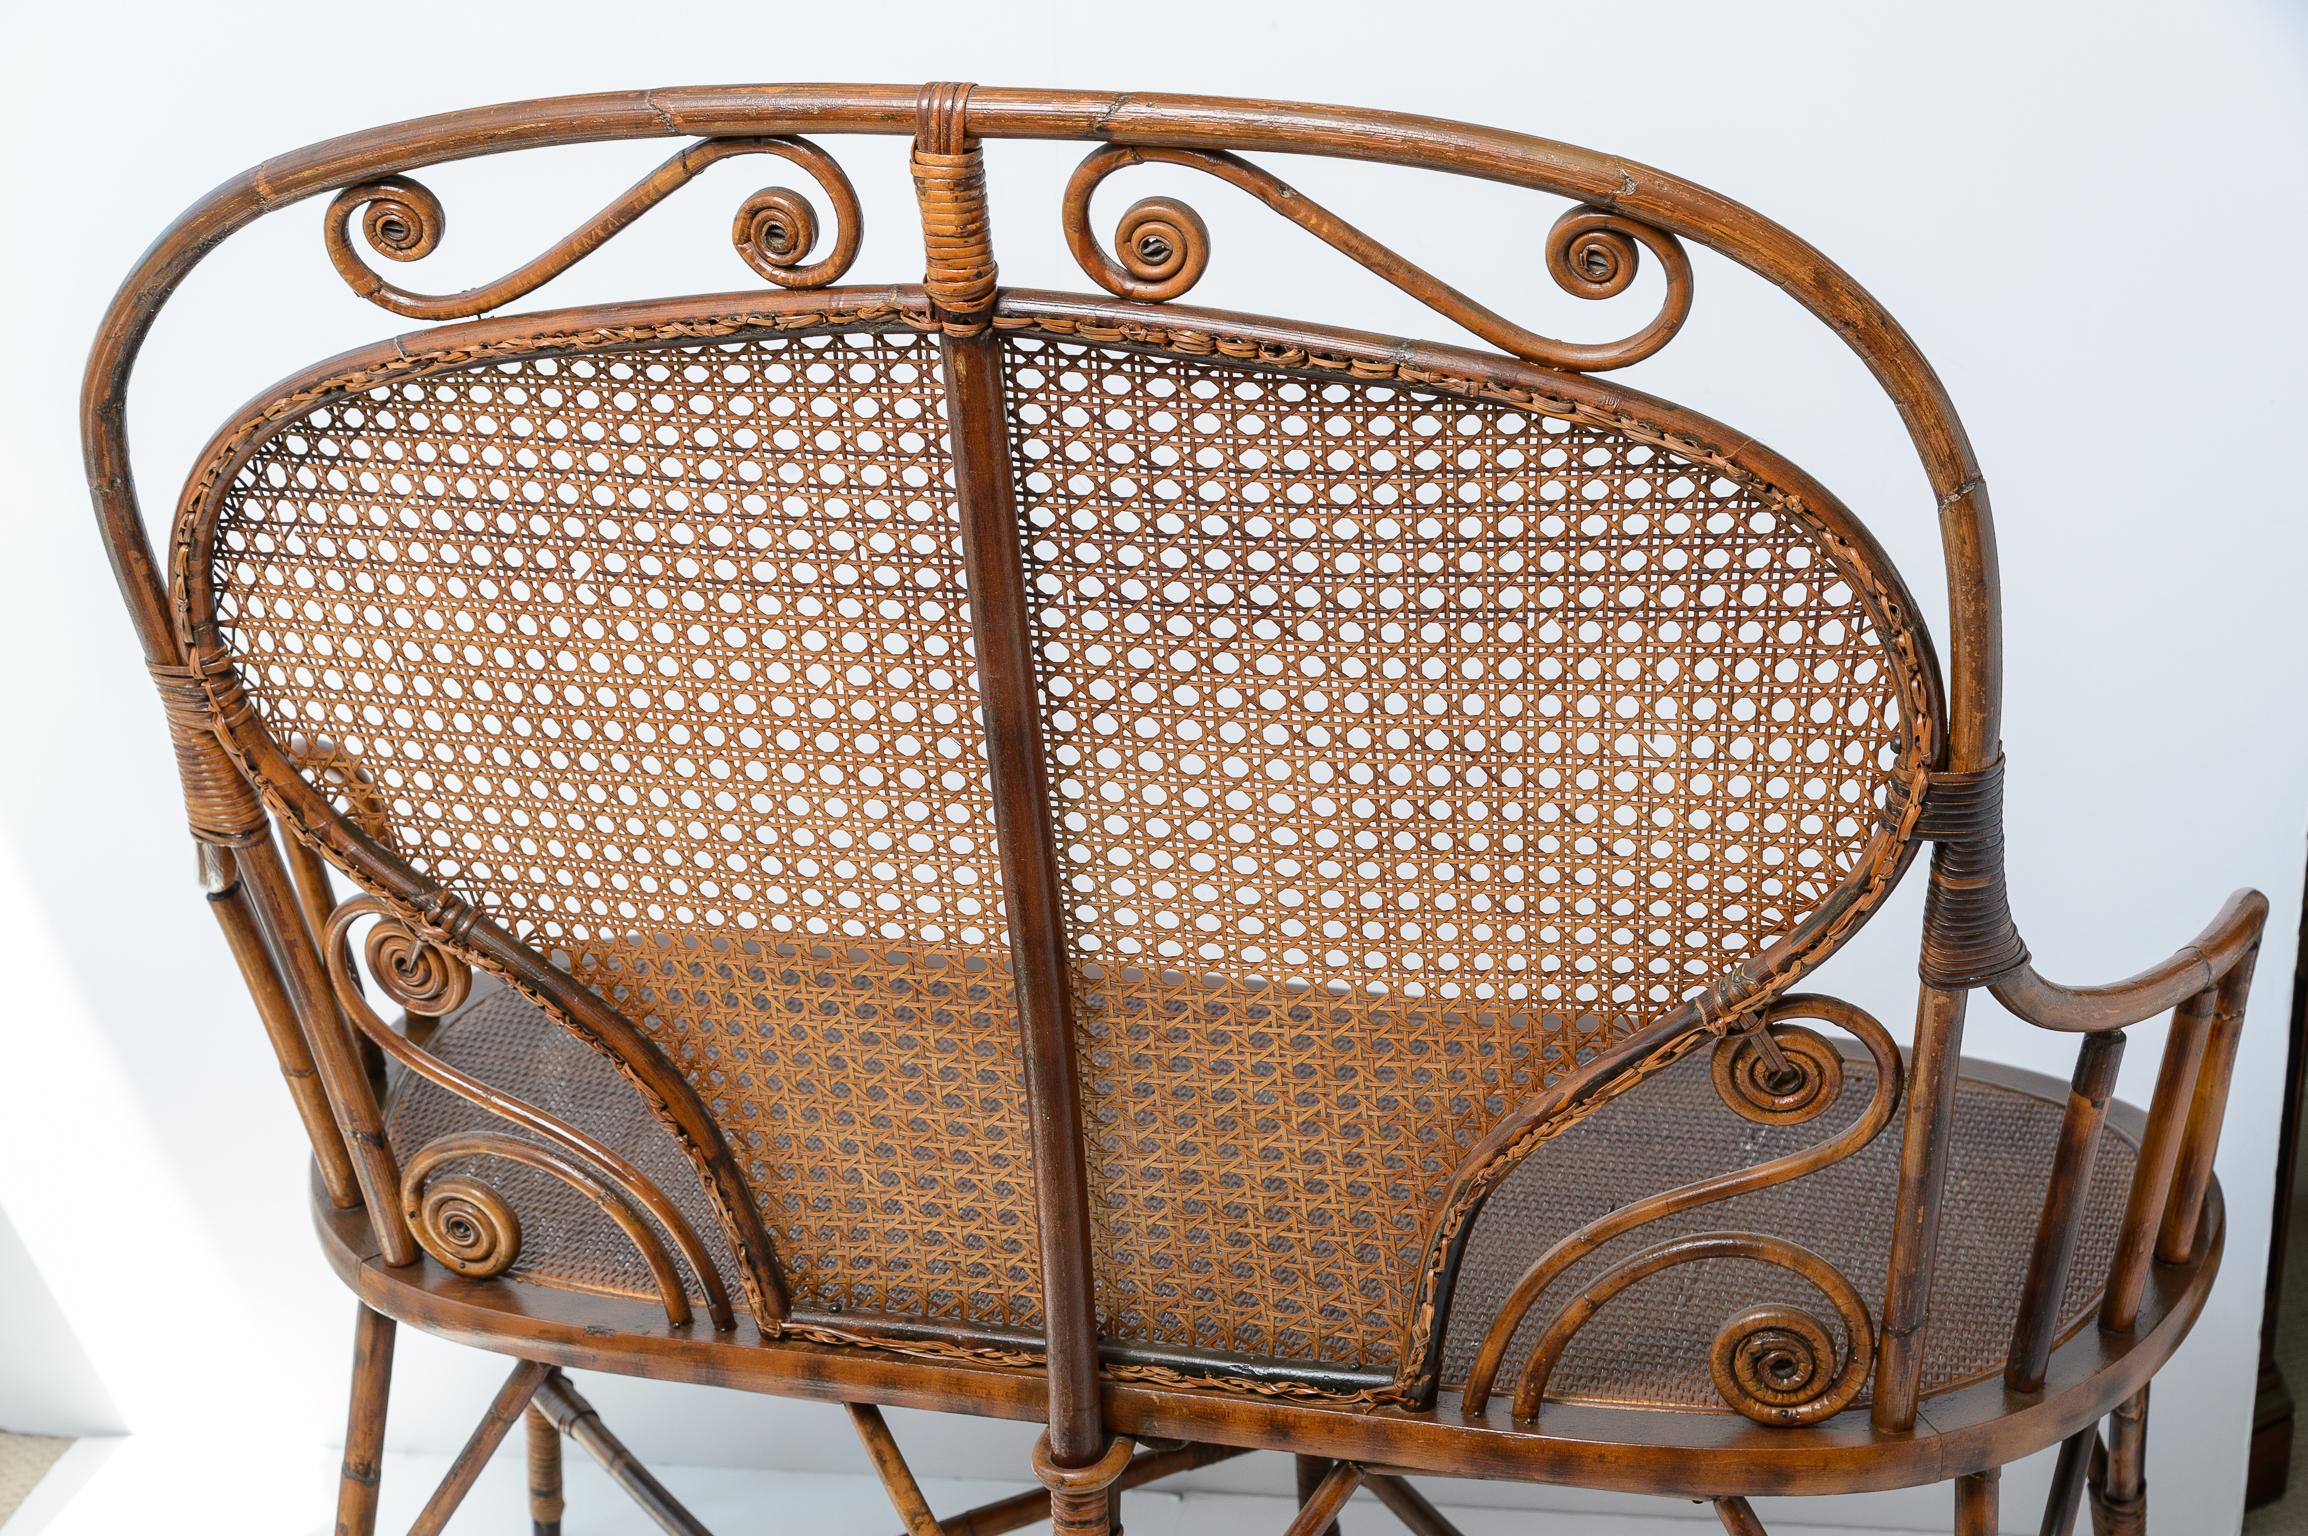 Antique Bentwood & Cane Settee, Attributed to Michael Thonet, C1900-1920s In Good Condition For Sale In West Palm Beach, FL